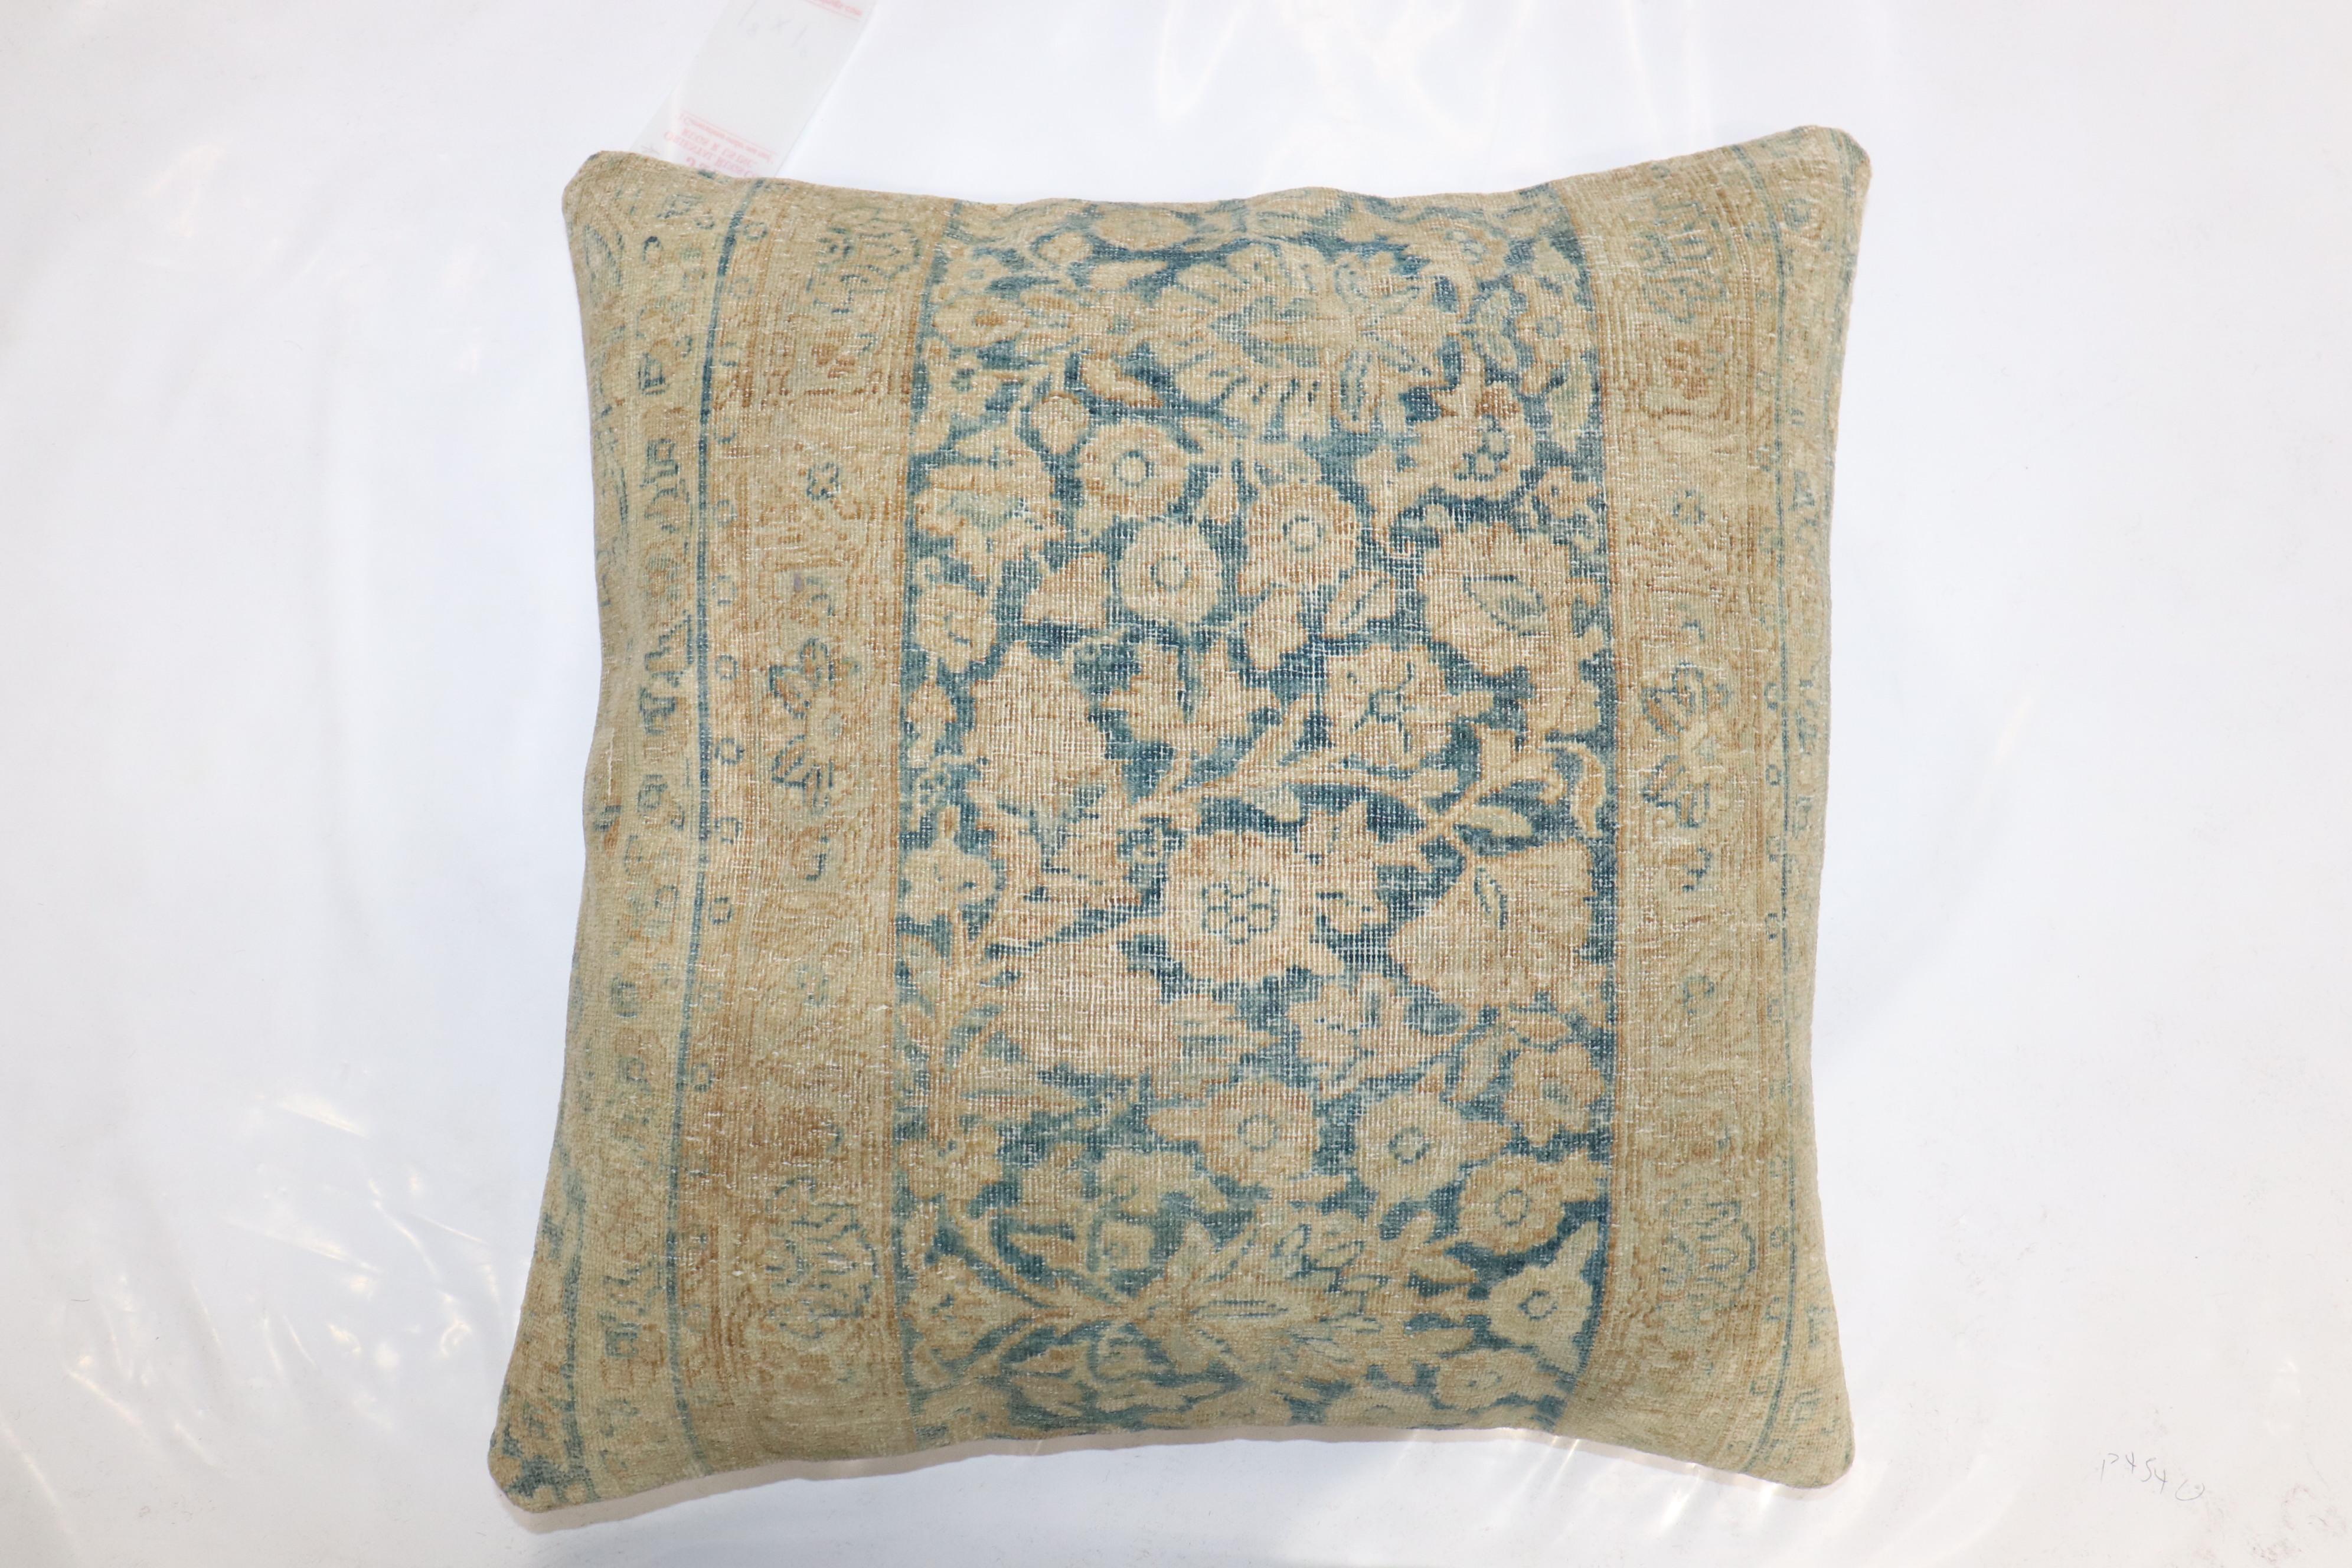 Pillow made from a 19th century Persian Kerman rug. Fill insert and zipper closure provided

Measures: 20